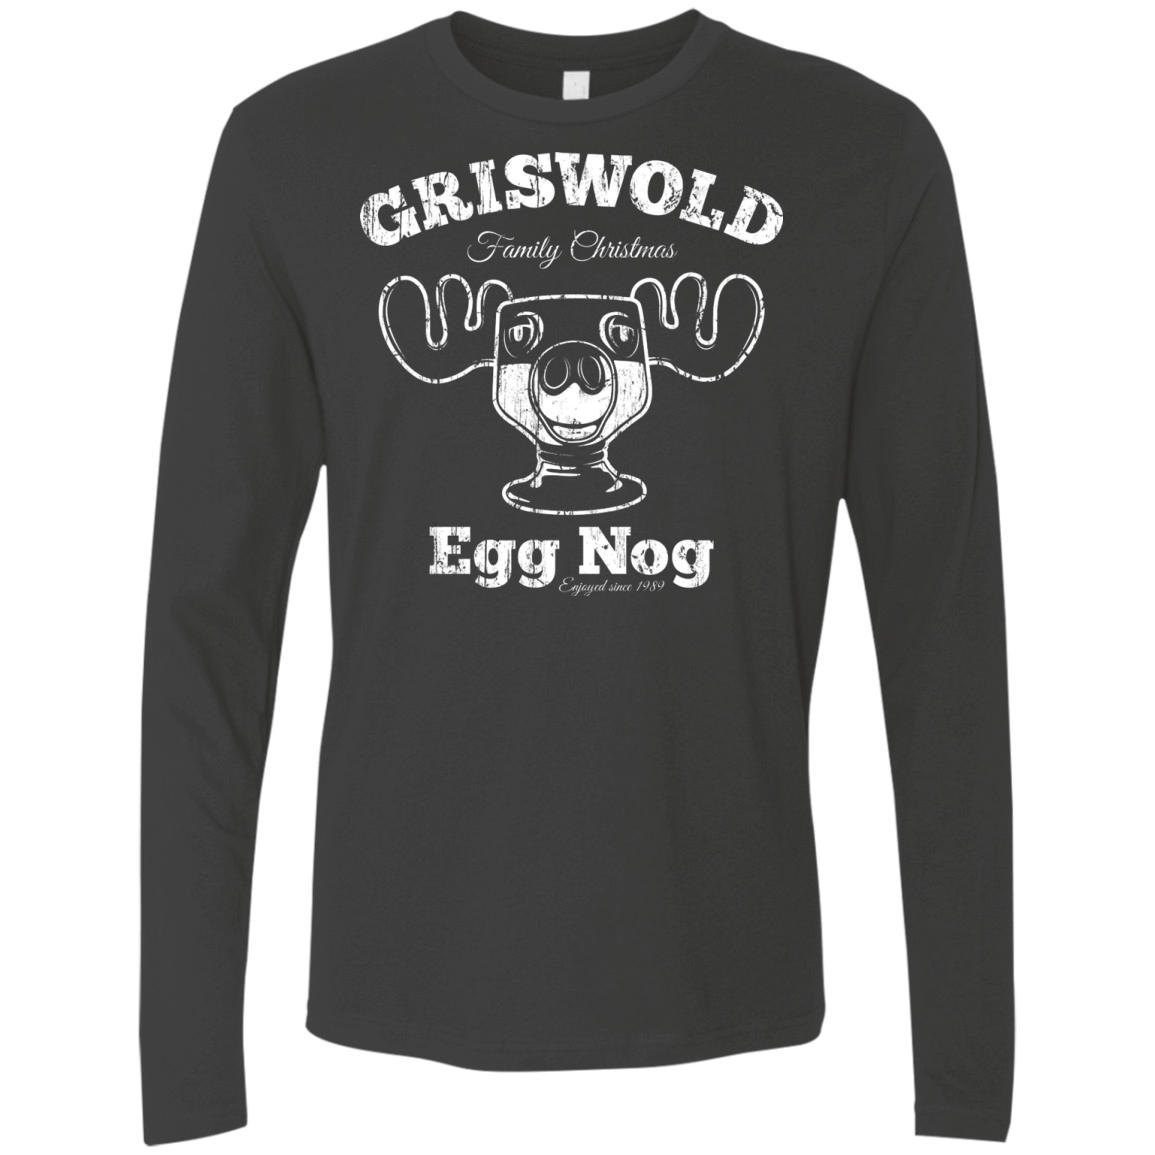 T-Shirts Heavy Metal / Small Griswold Christmas Egg Nog Men's Premium Long Sleeve